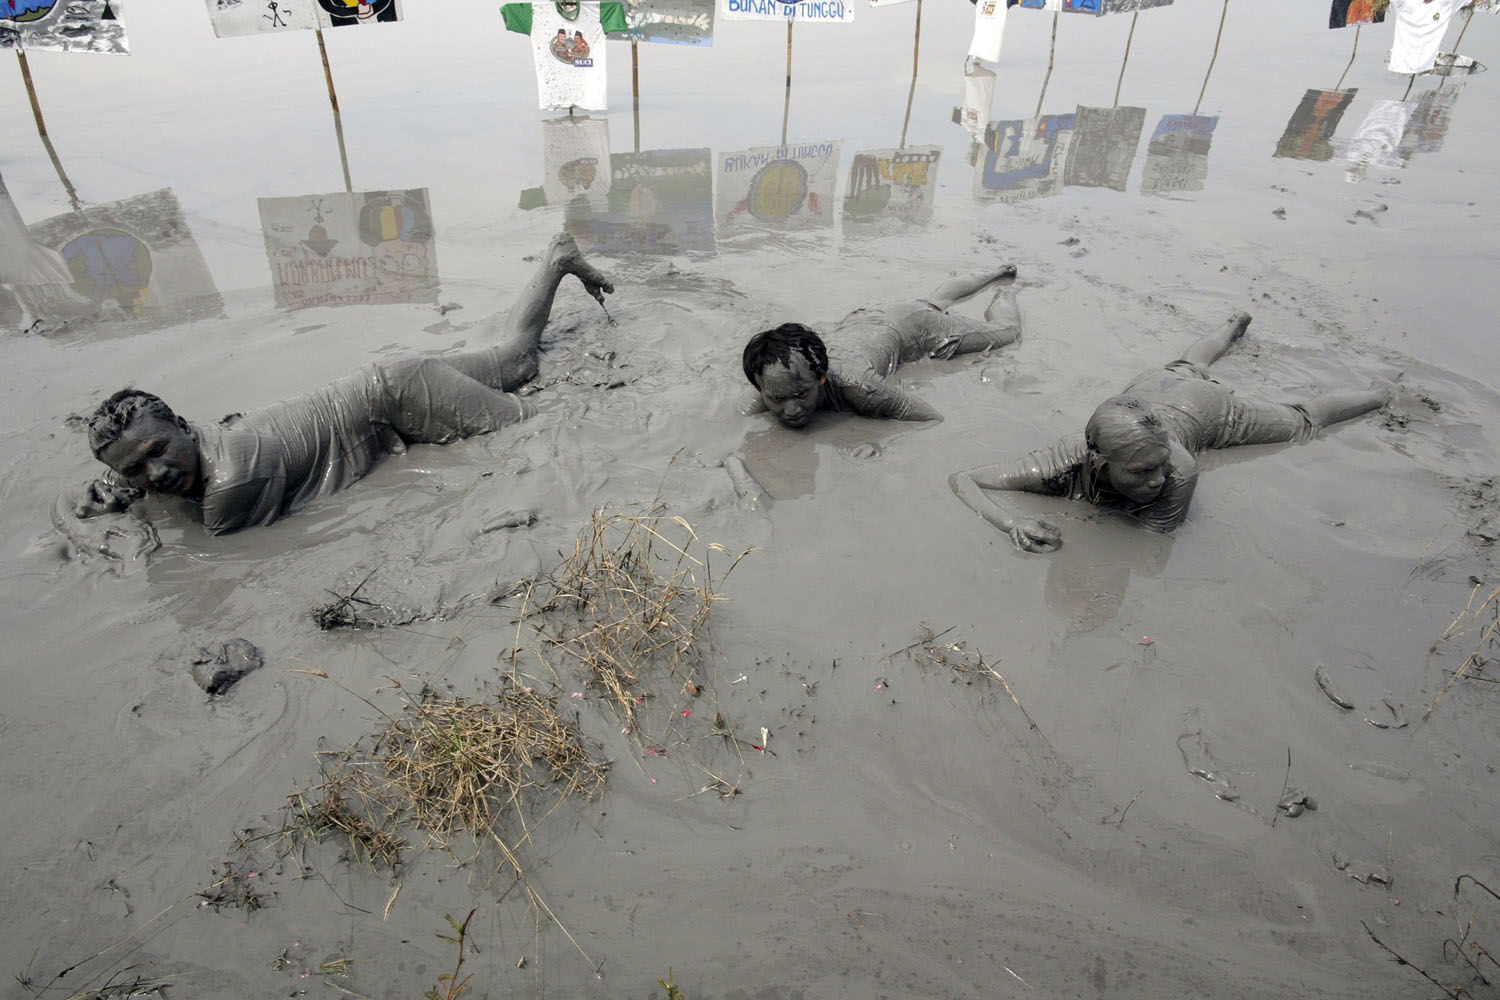 May 29, 2013. Displaced residents immerse themselves in massive mud deposits from the mud volcano in Sidoarjo village, located on Indonesia's eastern Java island to dramatize their sufferings during a protest marking the seventh year of the disaster.